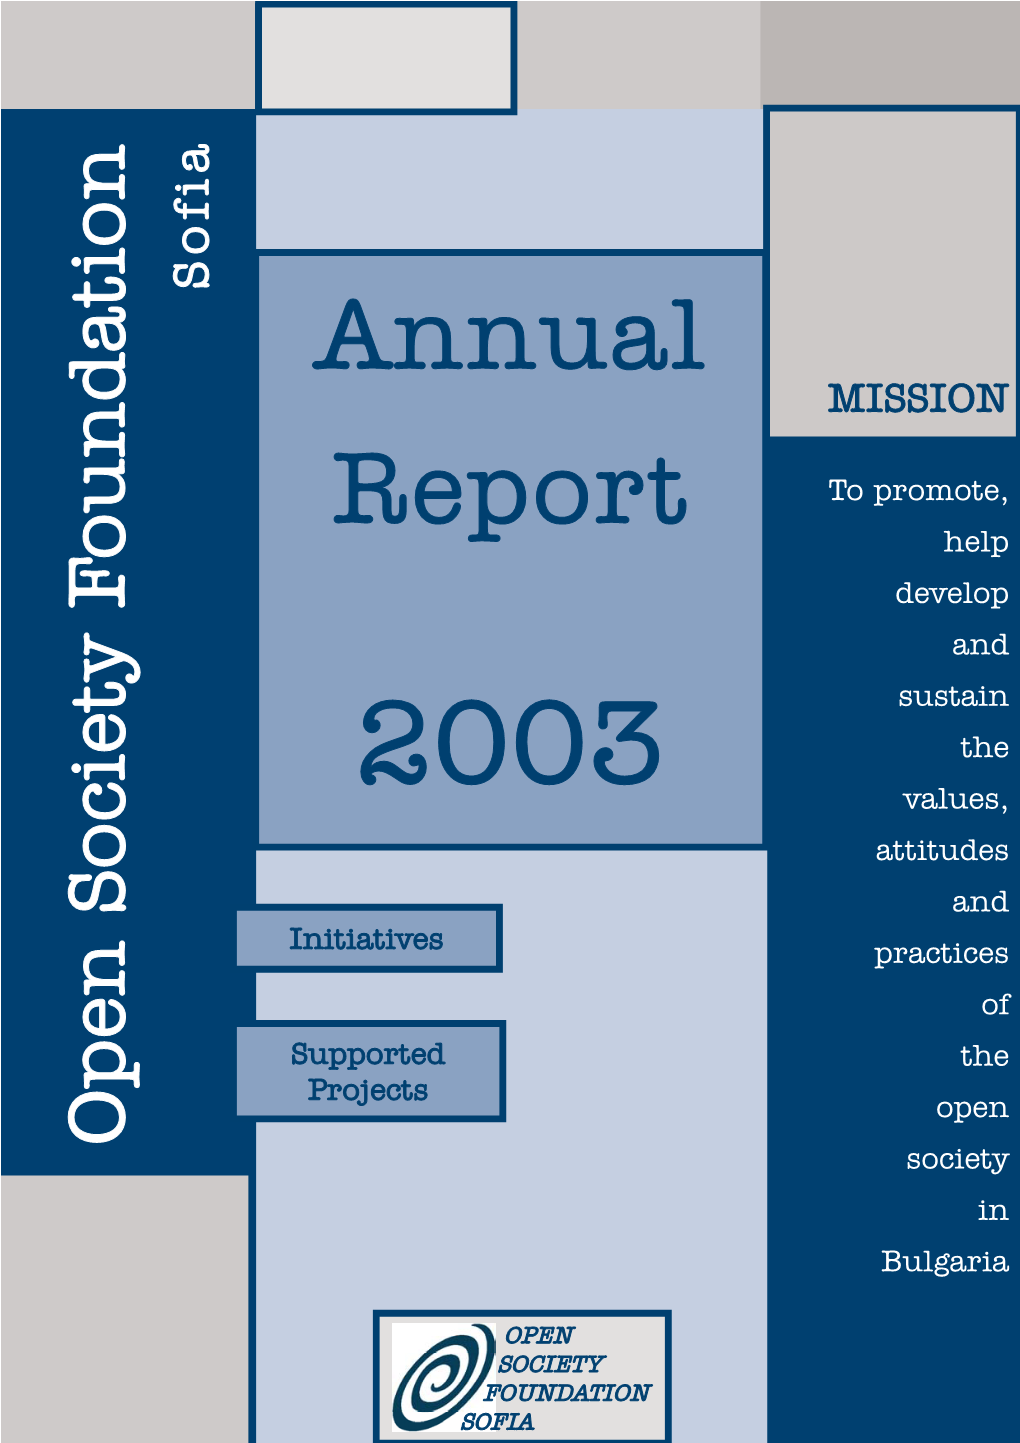 Annual Report on Its Activity